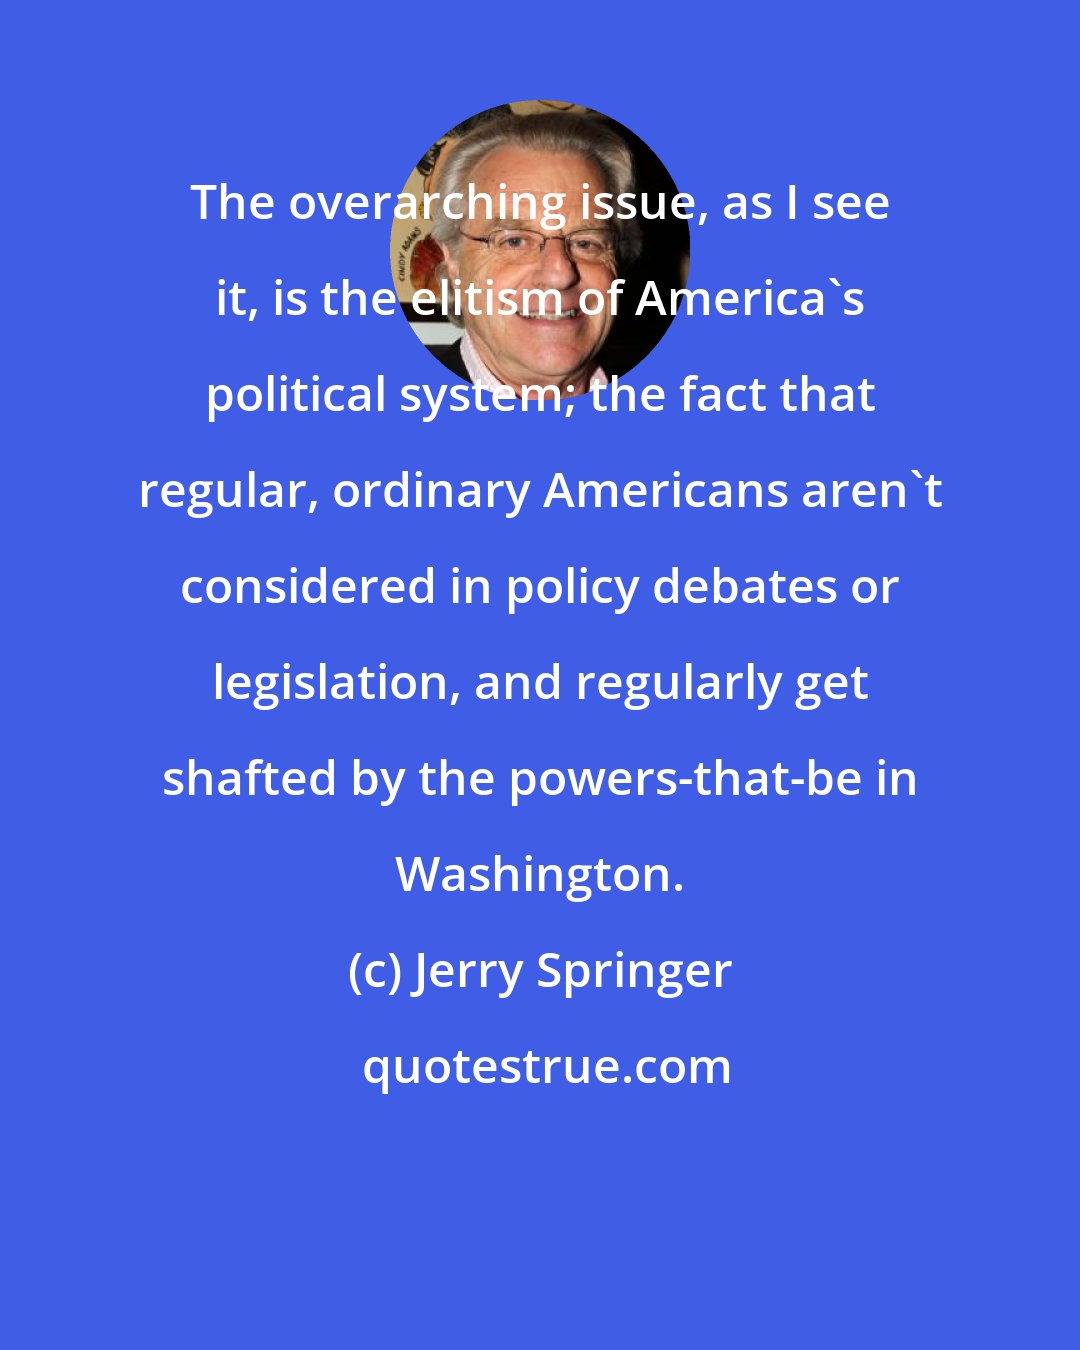 Jerry Springer: The overarching issue, as I see it, is the elitism of America's political system; the fact that regular, ordinary Americans aren't considered in policy debates or legislation, and regularly get shafted by the powers-that-be in Washington.